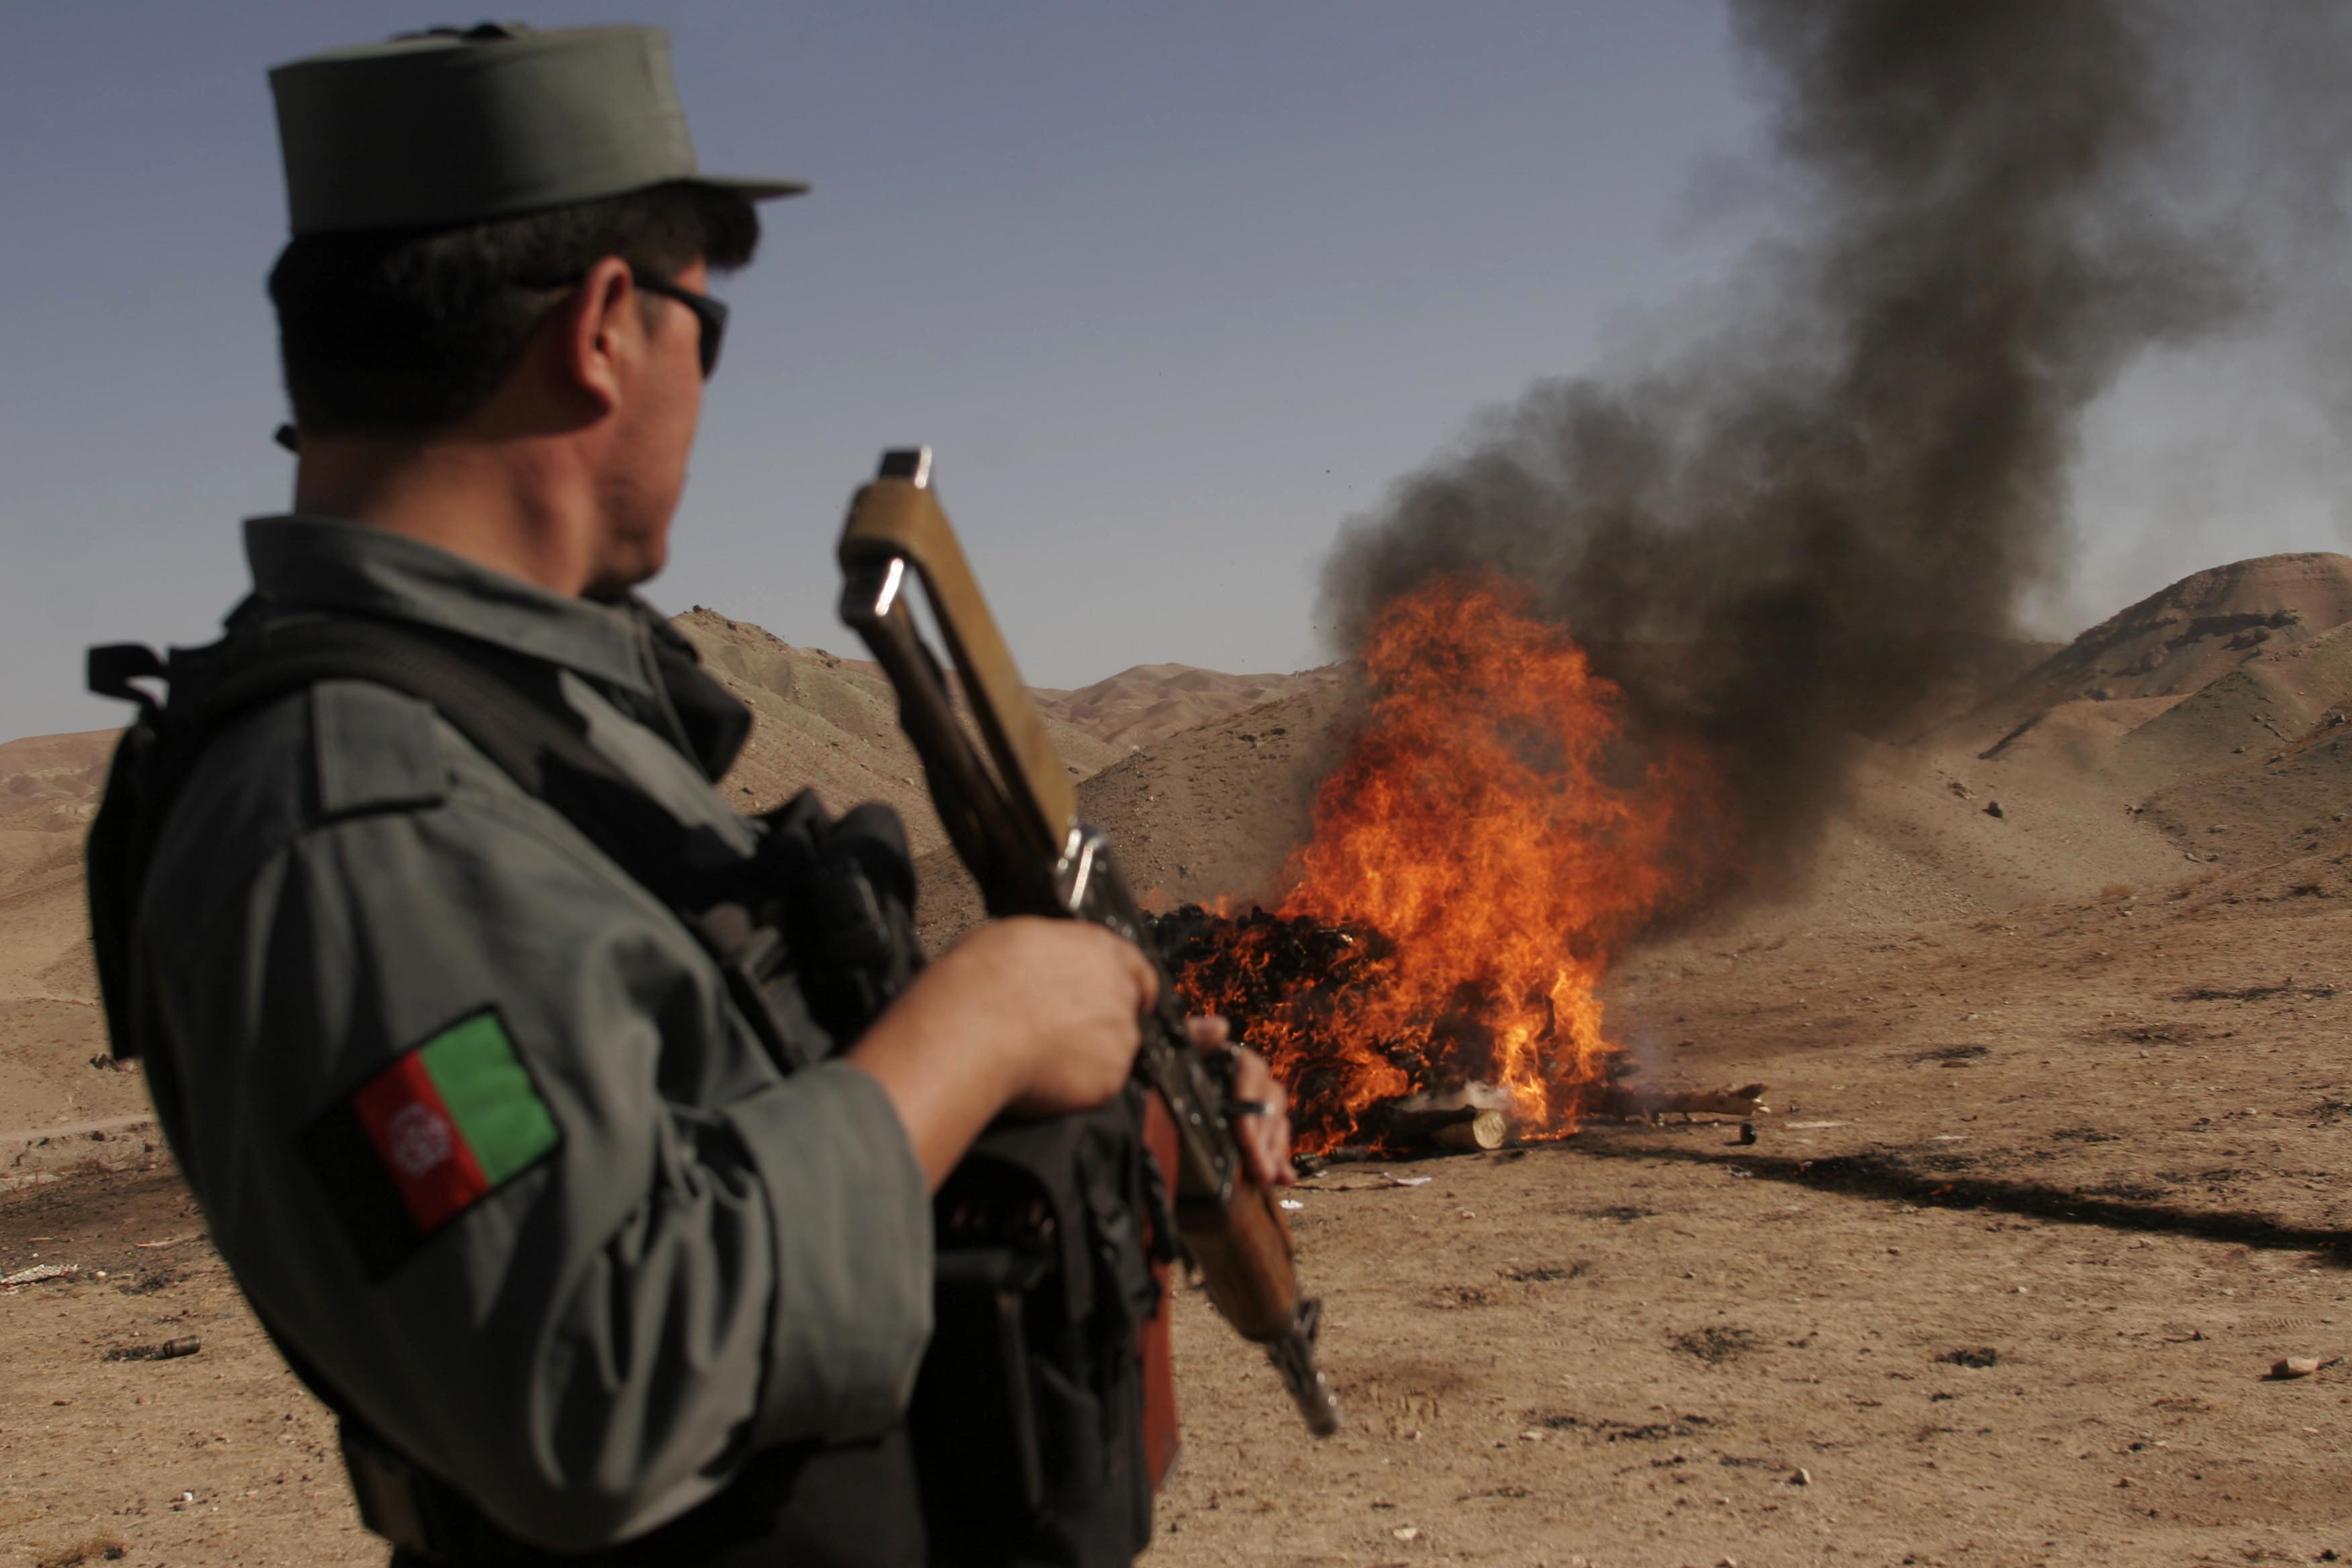 An Afghan security policeman stands guard as the smoke rises from a fire of confiscated drugs and alcohol on the outskirts of the city in Herat, south west of Kabul, Afghanistan on Nov, 11, 2007. (AP/Fraidoon Pooyaa)